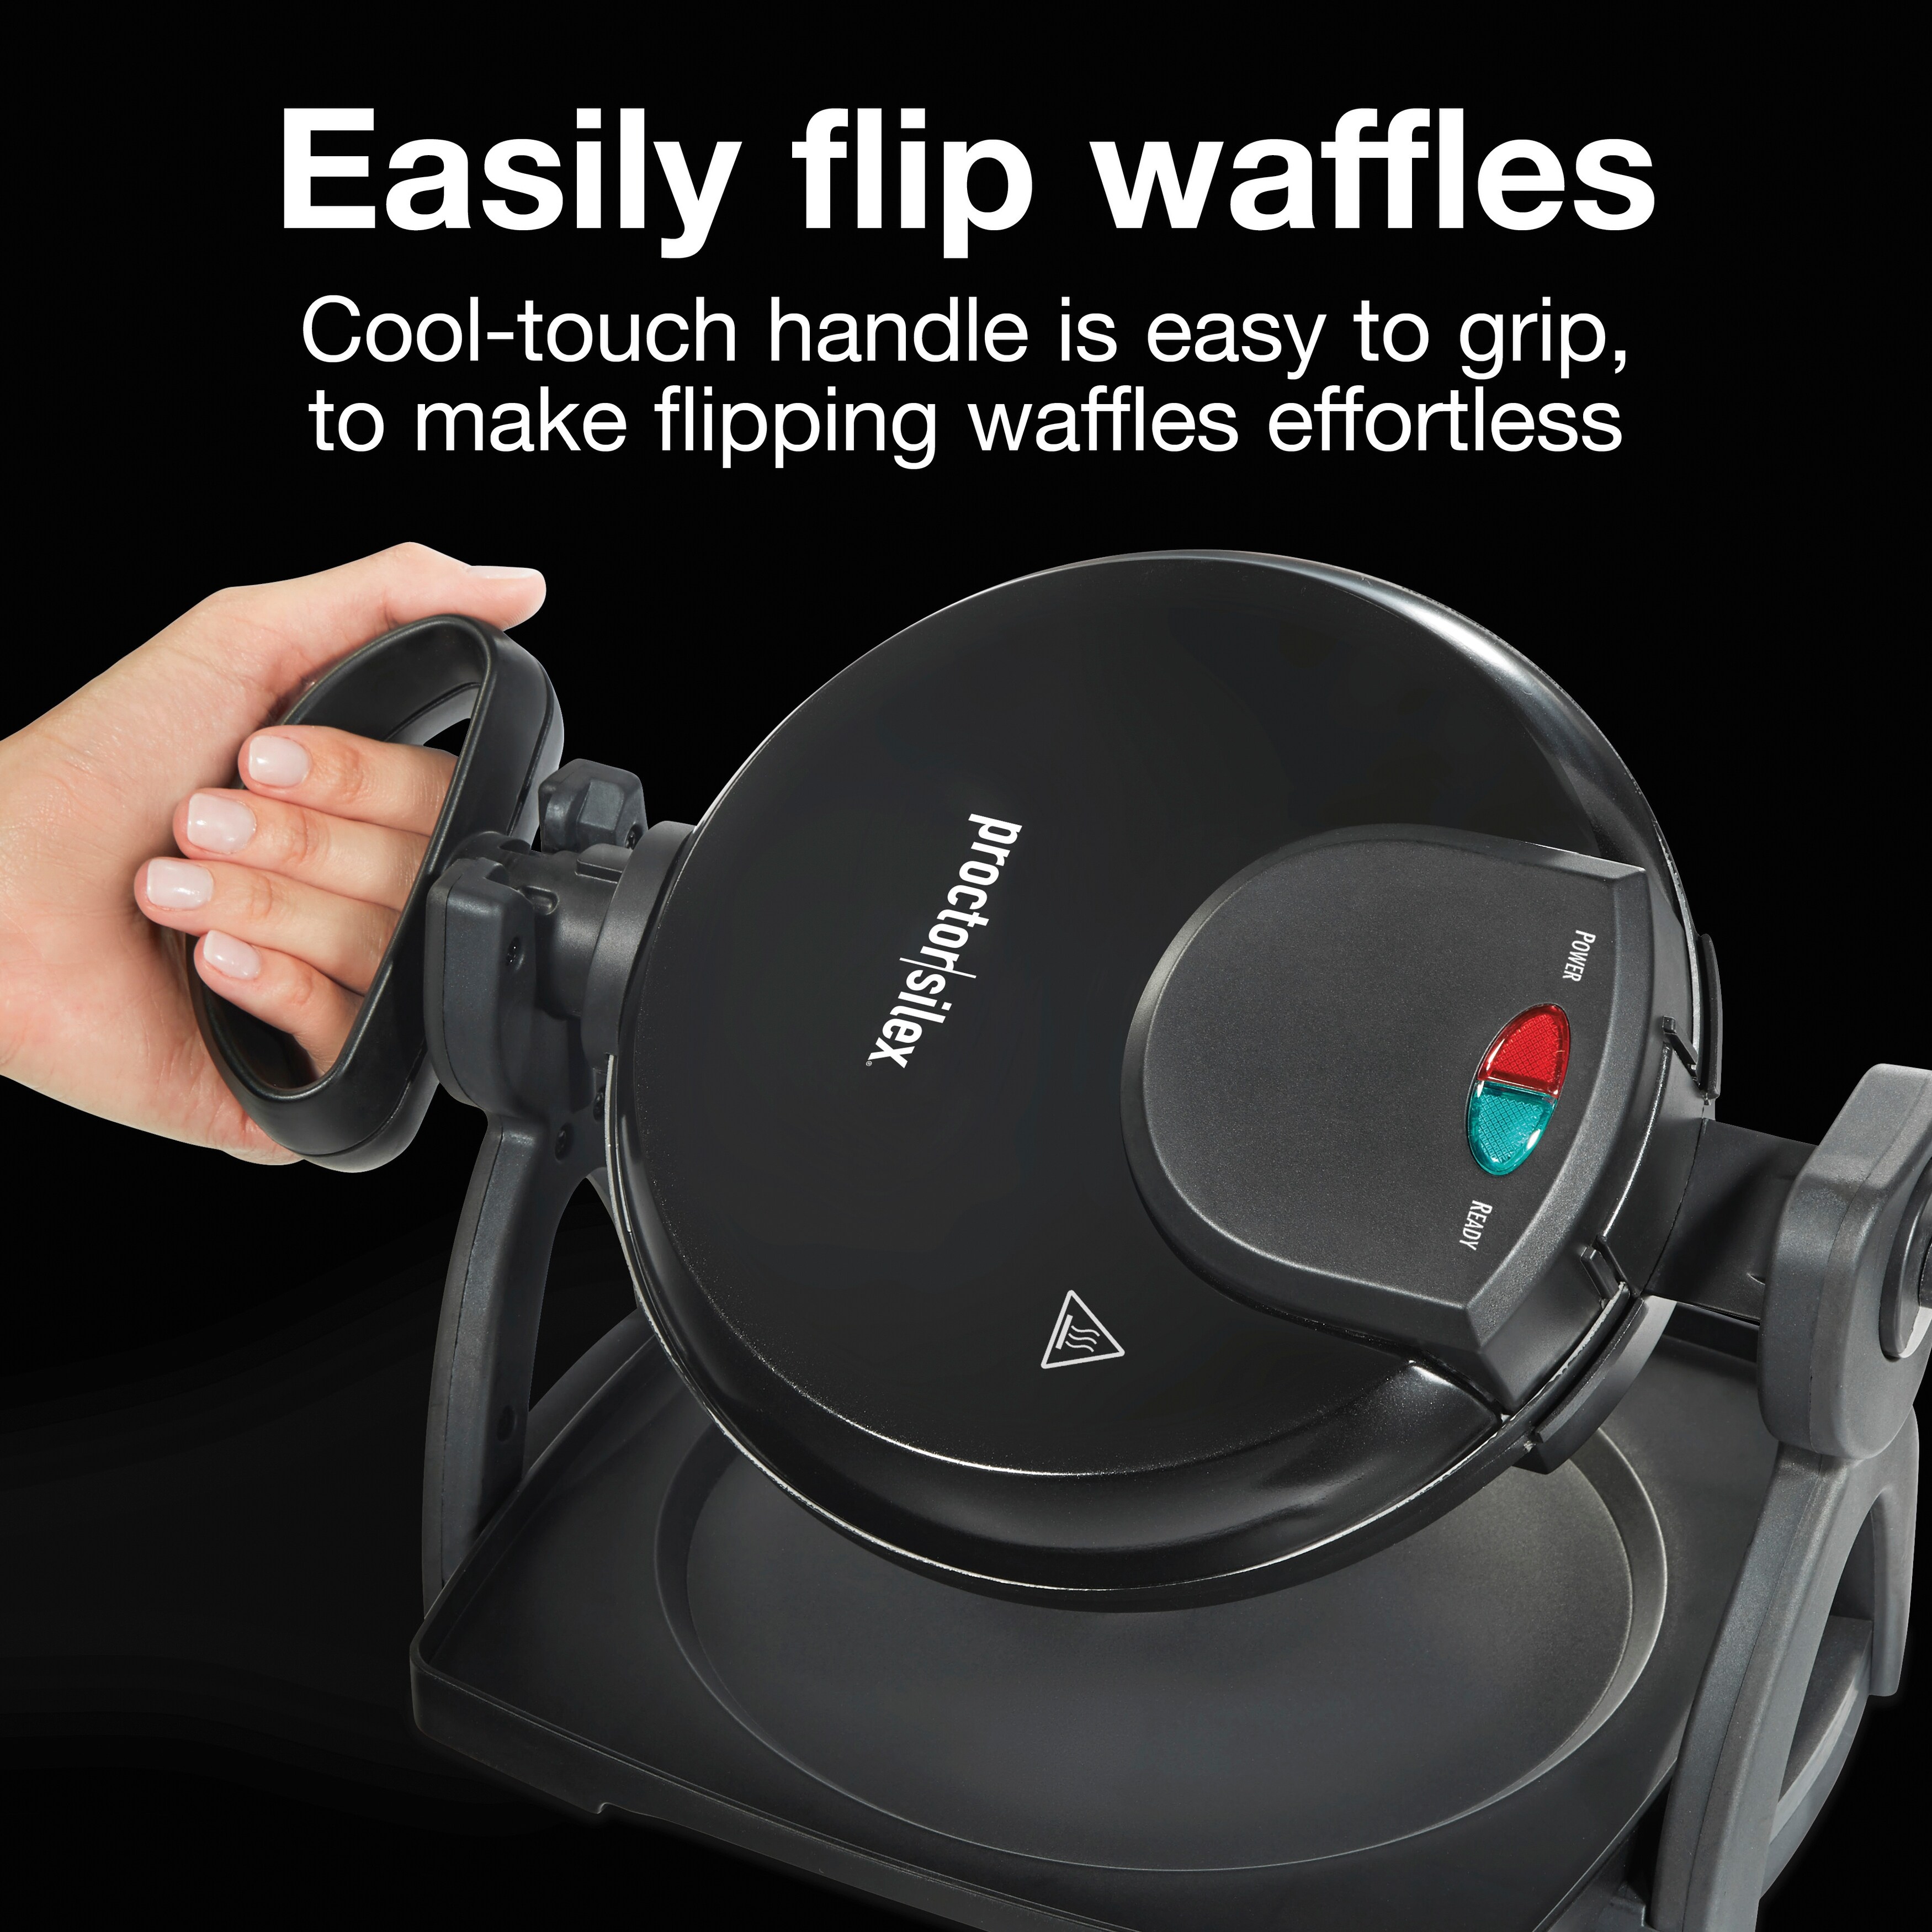 Proctor Silex Waffle Cone and Waffle Bowl Maker - Bed Bath & Beyond -  31764715